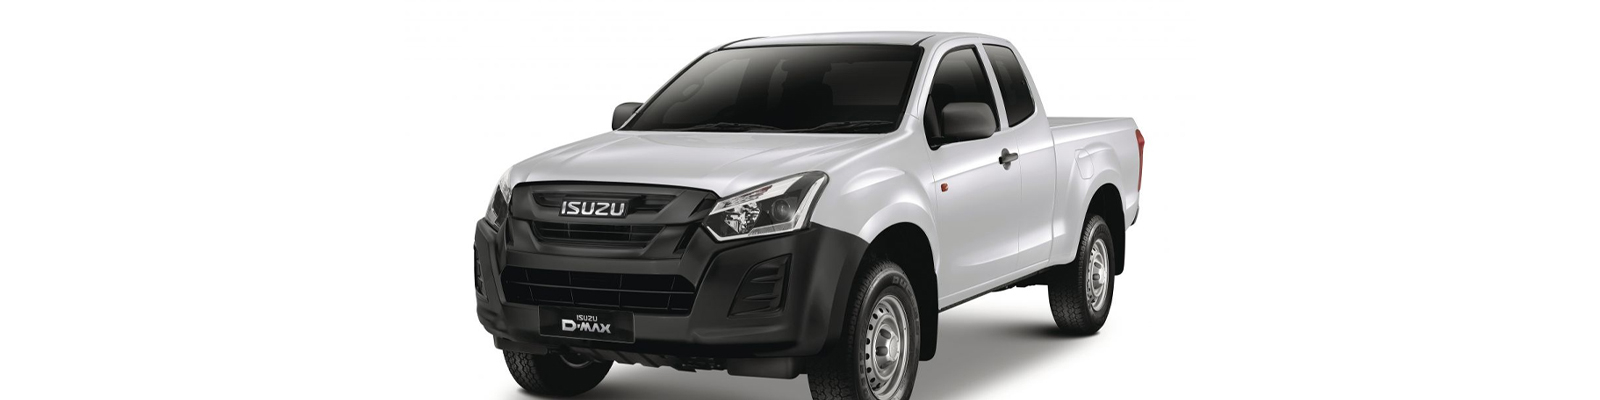 Accessories For Isuzu D-Max Extended Cab 2017-2021